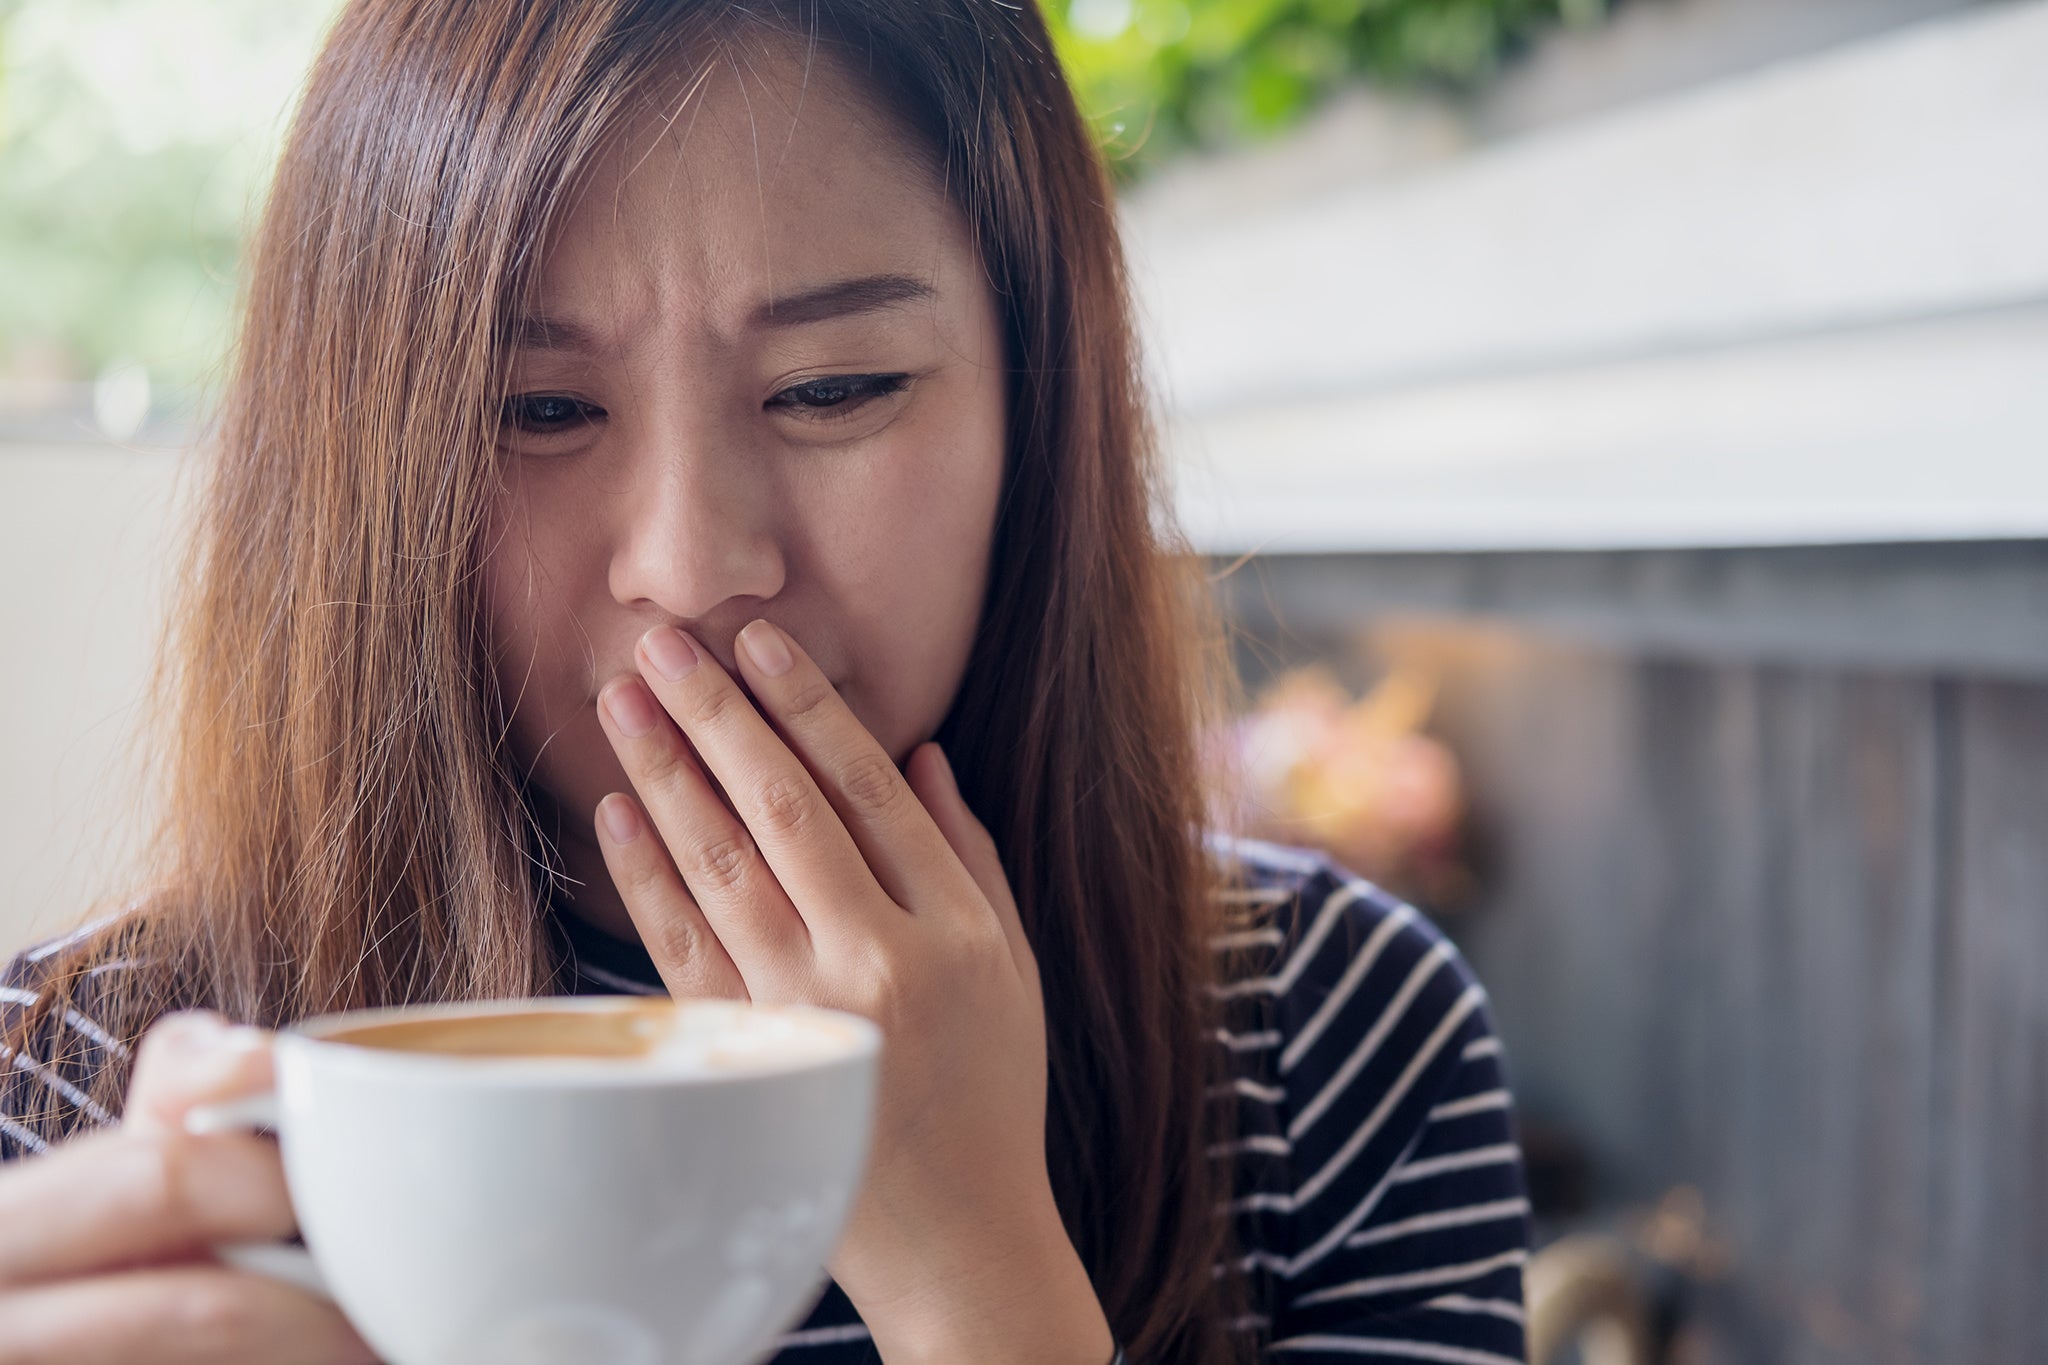 Asian woman drinking hot coffee cup outside hand over mouth